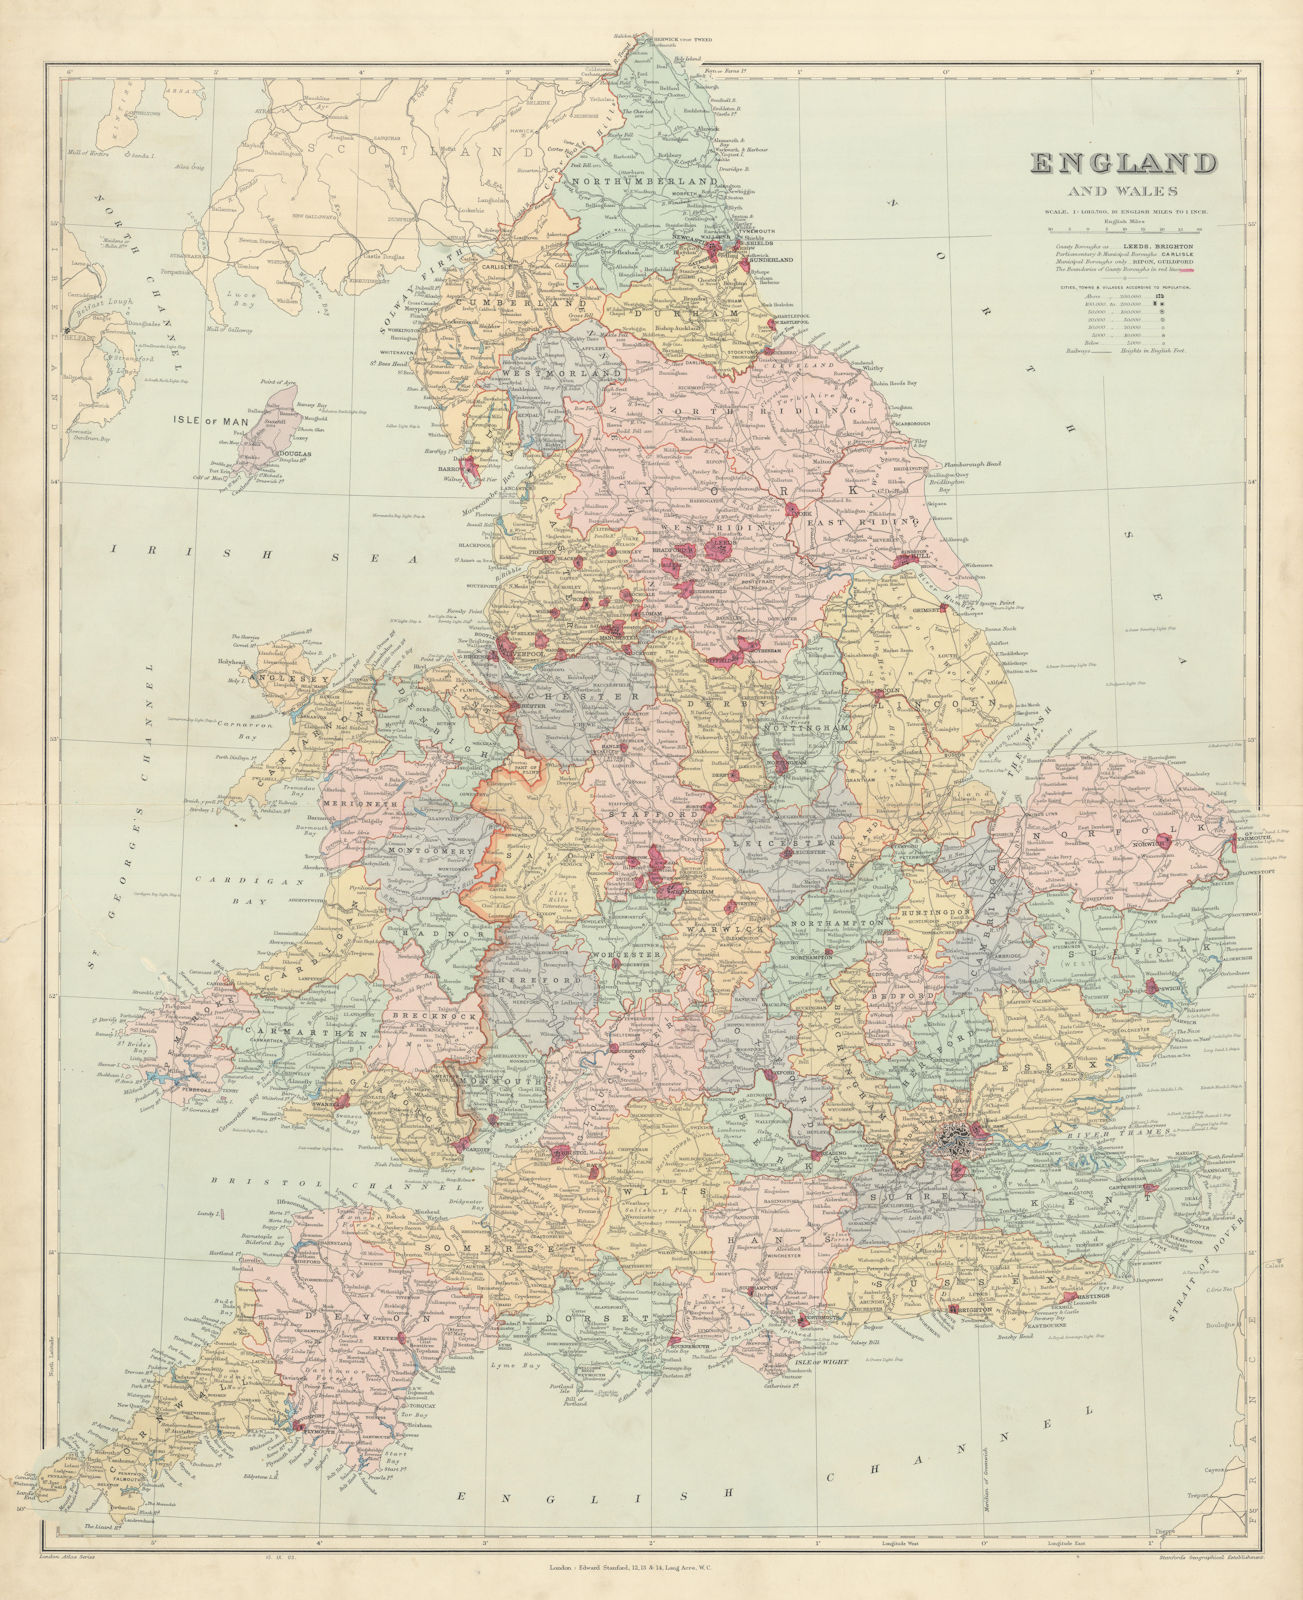 England and Wales in counties. Railways. Large 68x55cm. STANFORD 1904 old map